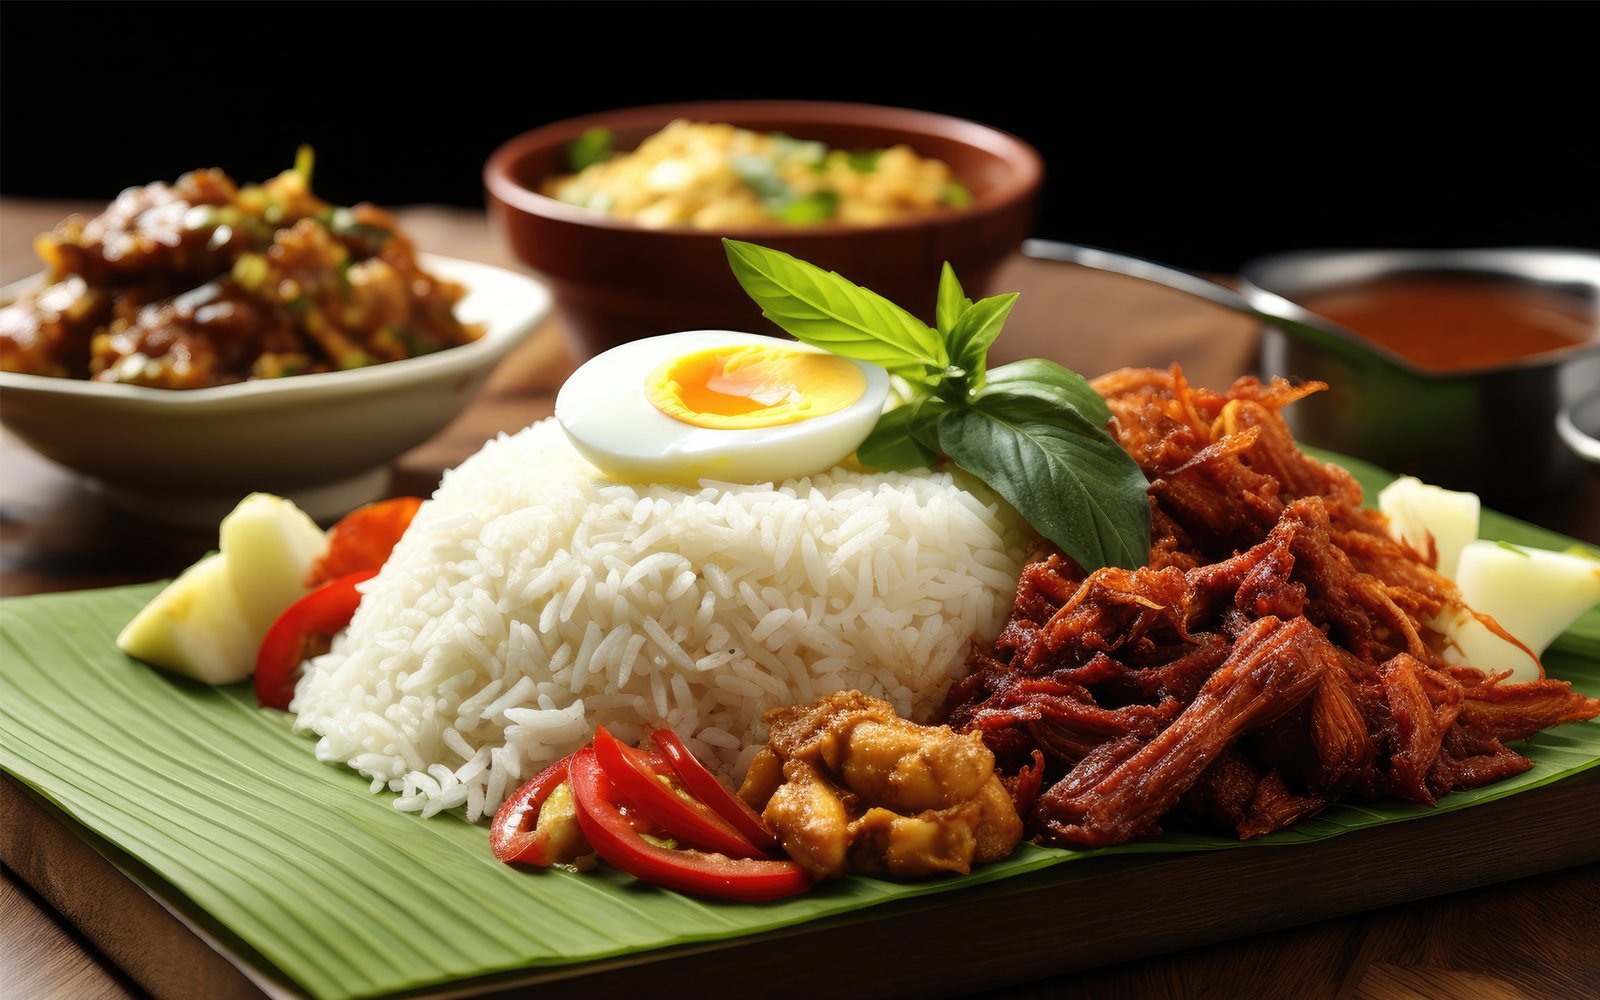 a plate of nasi lemak with half boiled egg, sambal and side dishes